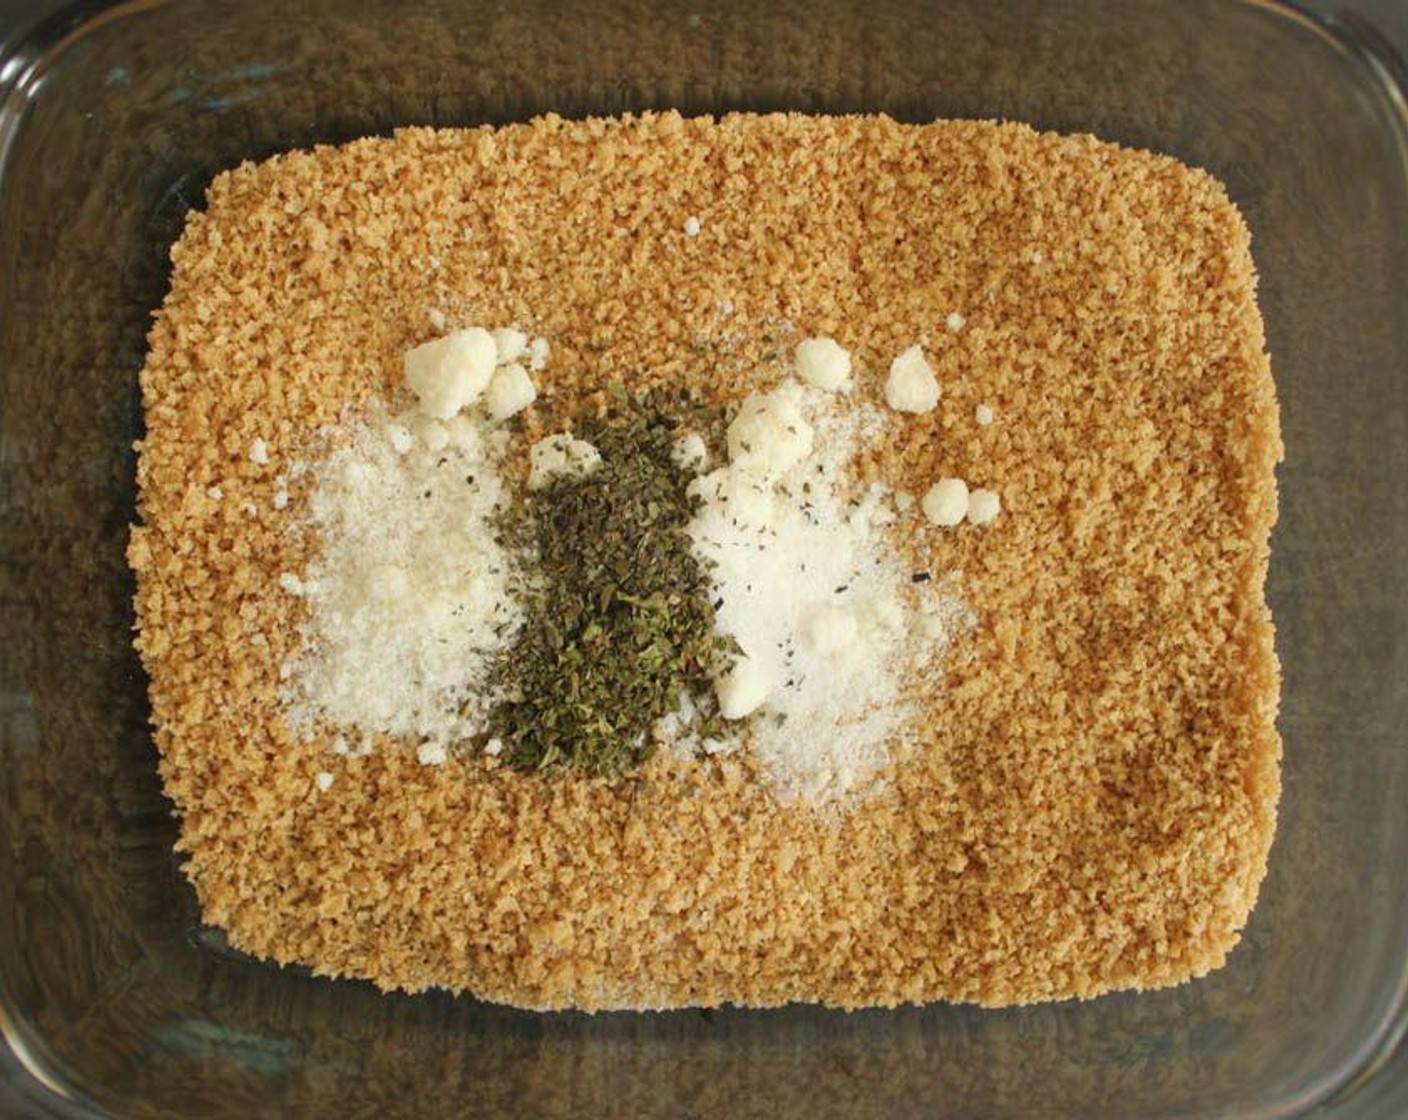 step 5 Now it’s time to prepare the breading for the cutlets. In a shallow baking dish, combine the Whole Wheat Panko Breadcrumbs (1 cup), Grated Parmesan Cheese (2 1/2 Tbsp), Salt (1/4 tsp), Dried Basil (1/2 tsp), Dried Oregano (1/2 tsp), and Cayenne Pepper (1 pinch).